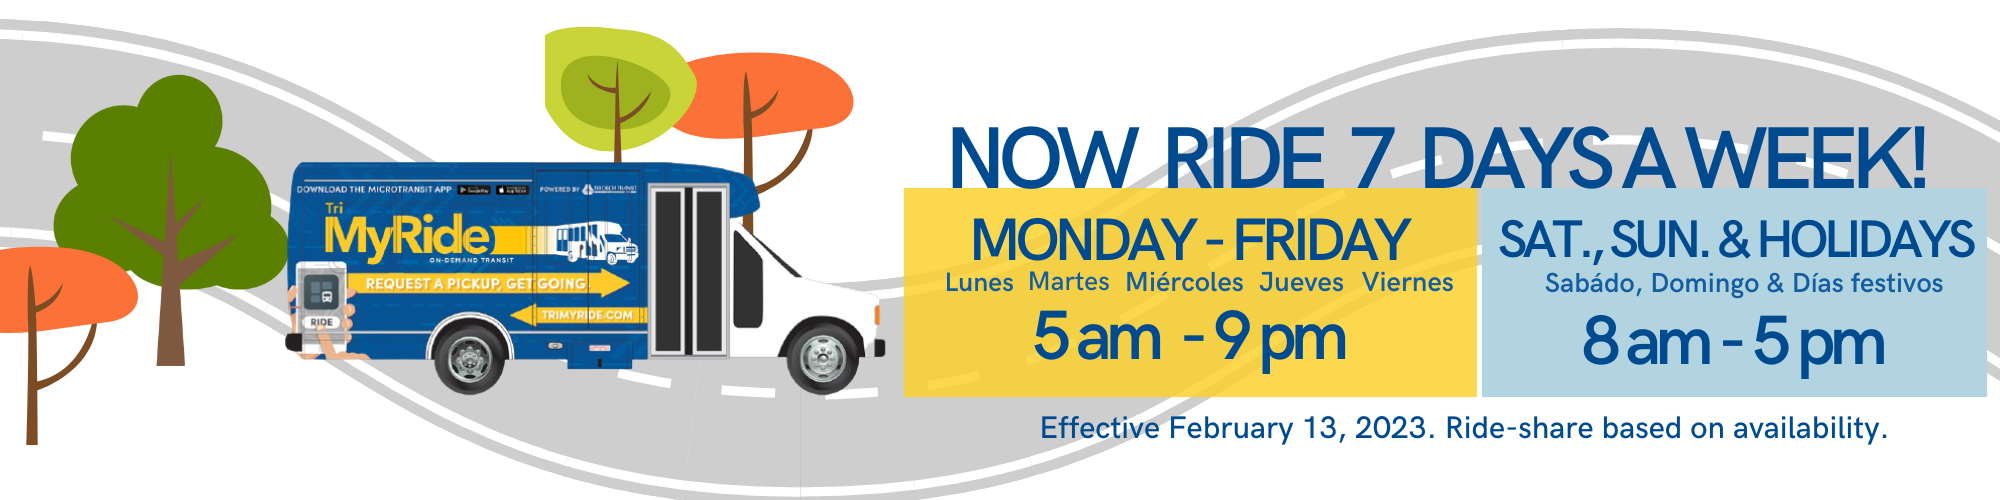 Beginning the week of February 13, 2023 Tri MyRide will offer weekend service too.